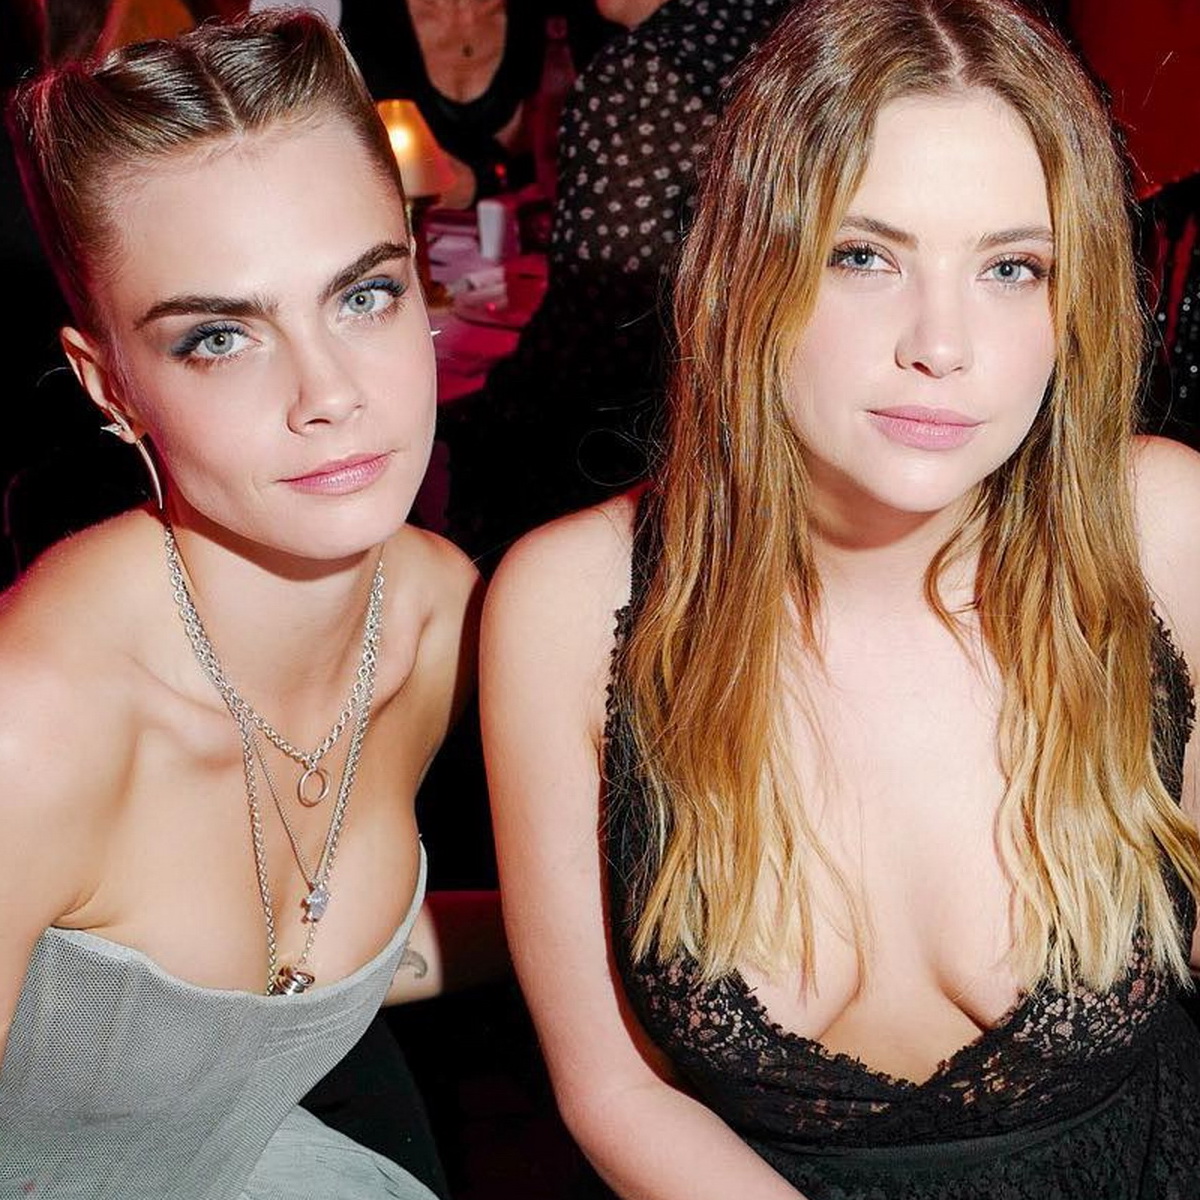 Ashley Benson and Cara Delevigne braless in see thru dress on Dior Lipstick Launch Party HQ (2).jpg